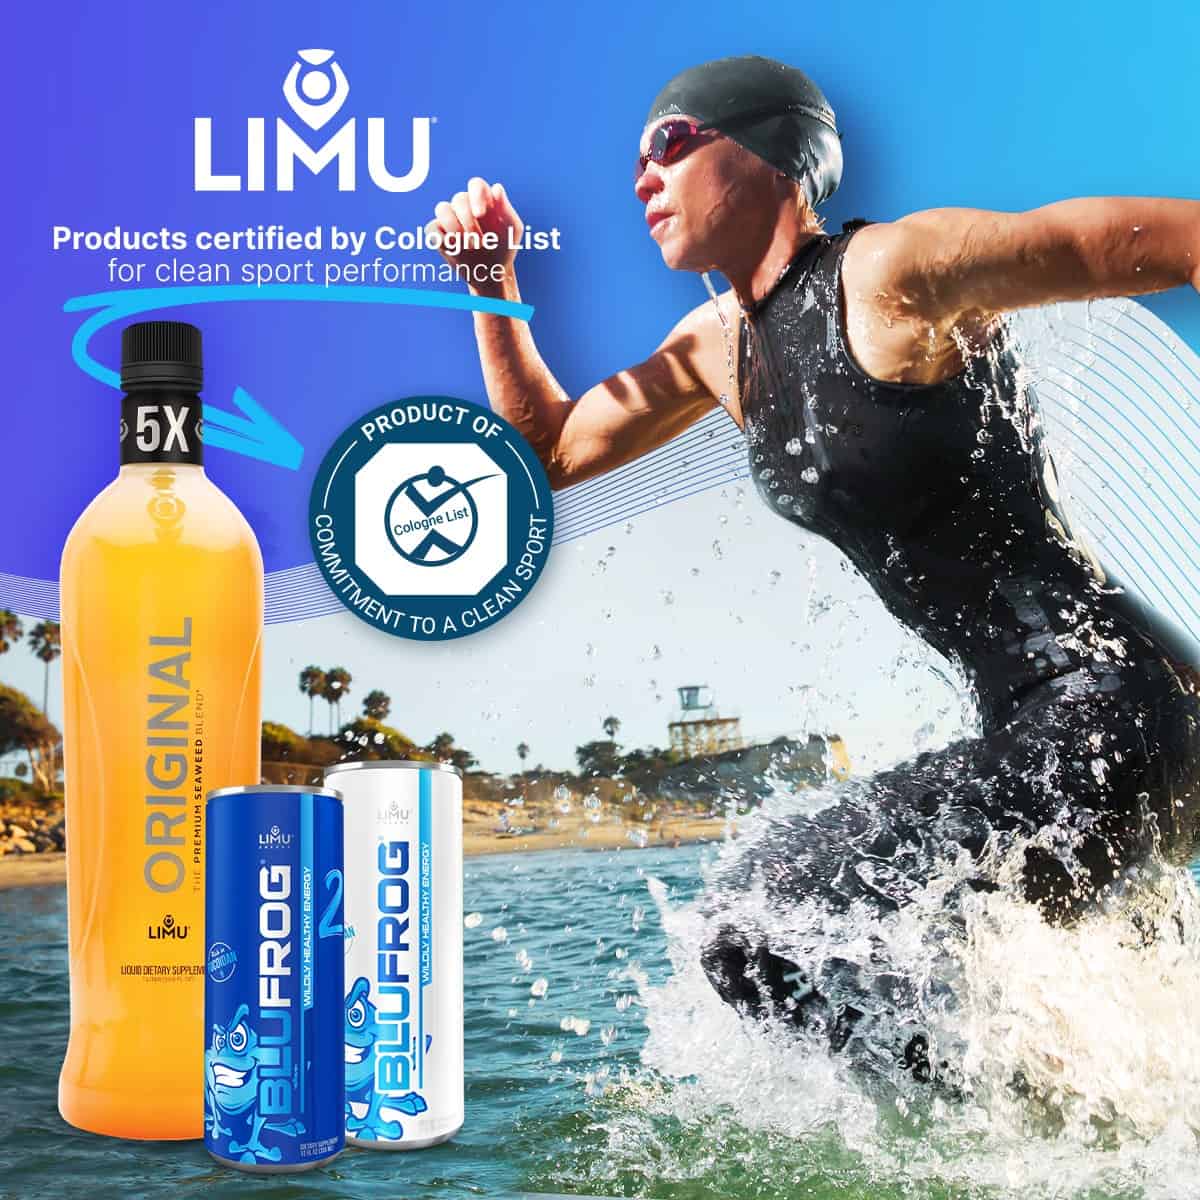 Limu Products Certified by Cologne List